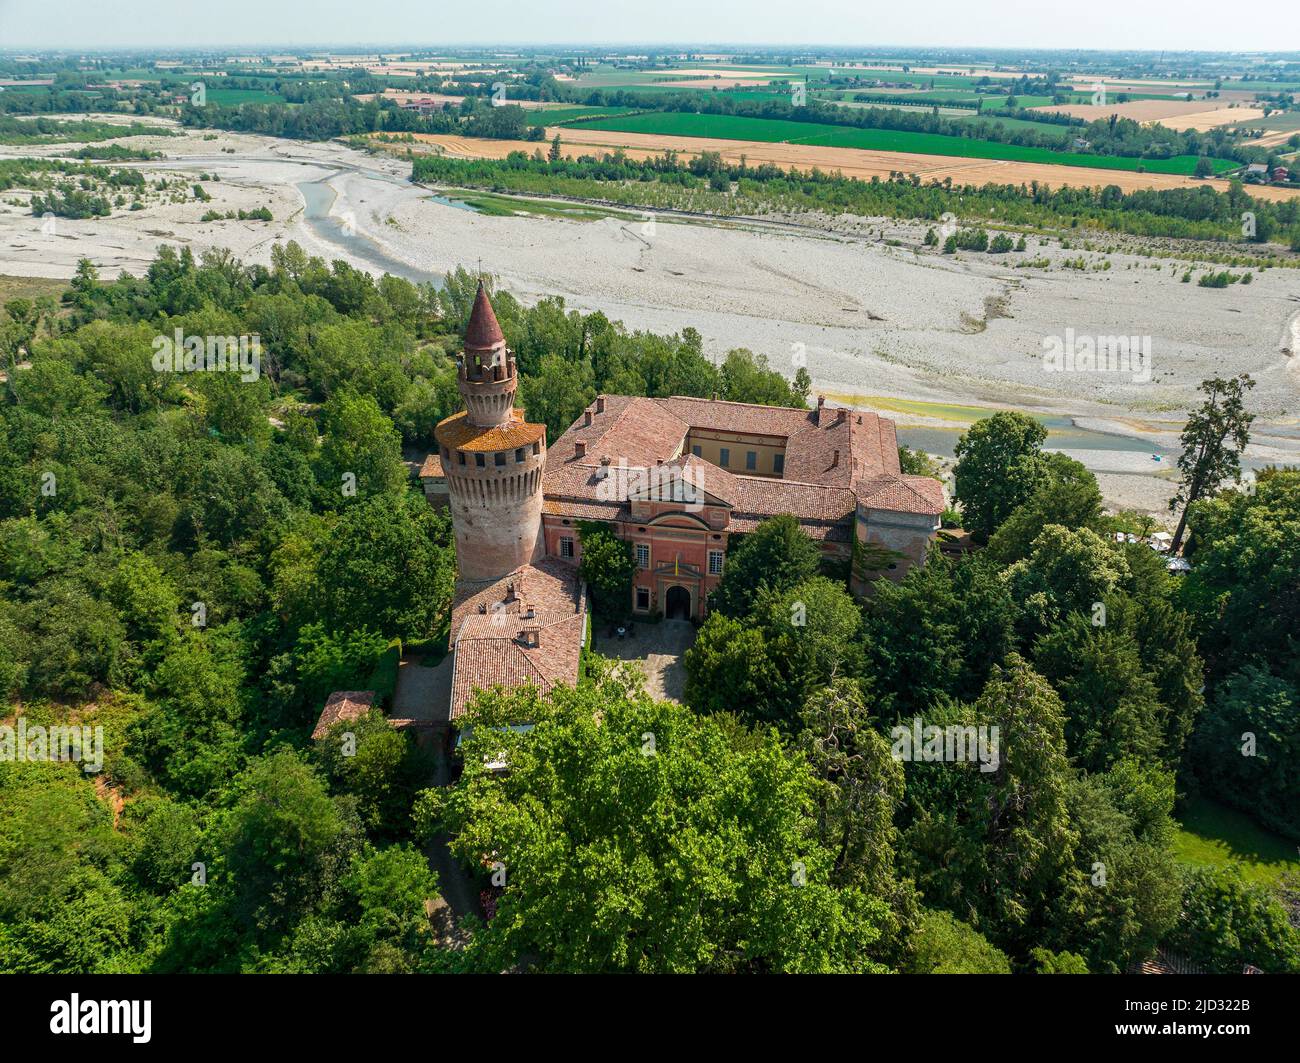 Aerial view of Rivalta castle on the Trebbia river, Piacenza province, Emilia-Romagna, Italy. It is a fortified complex with a cylindrical tower Stock Photo